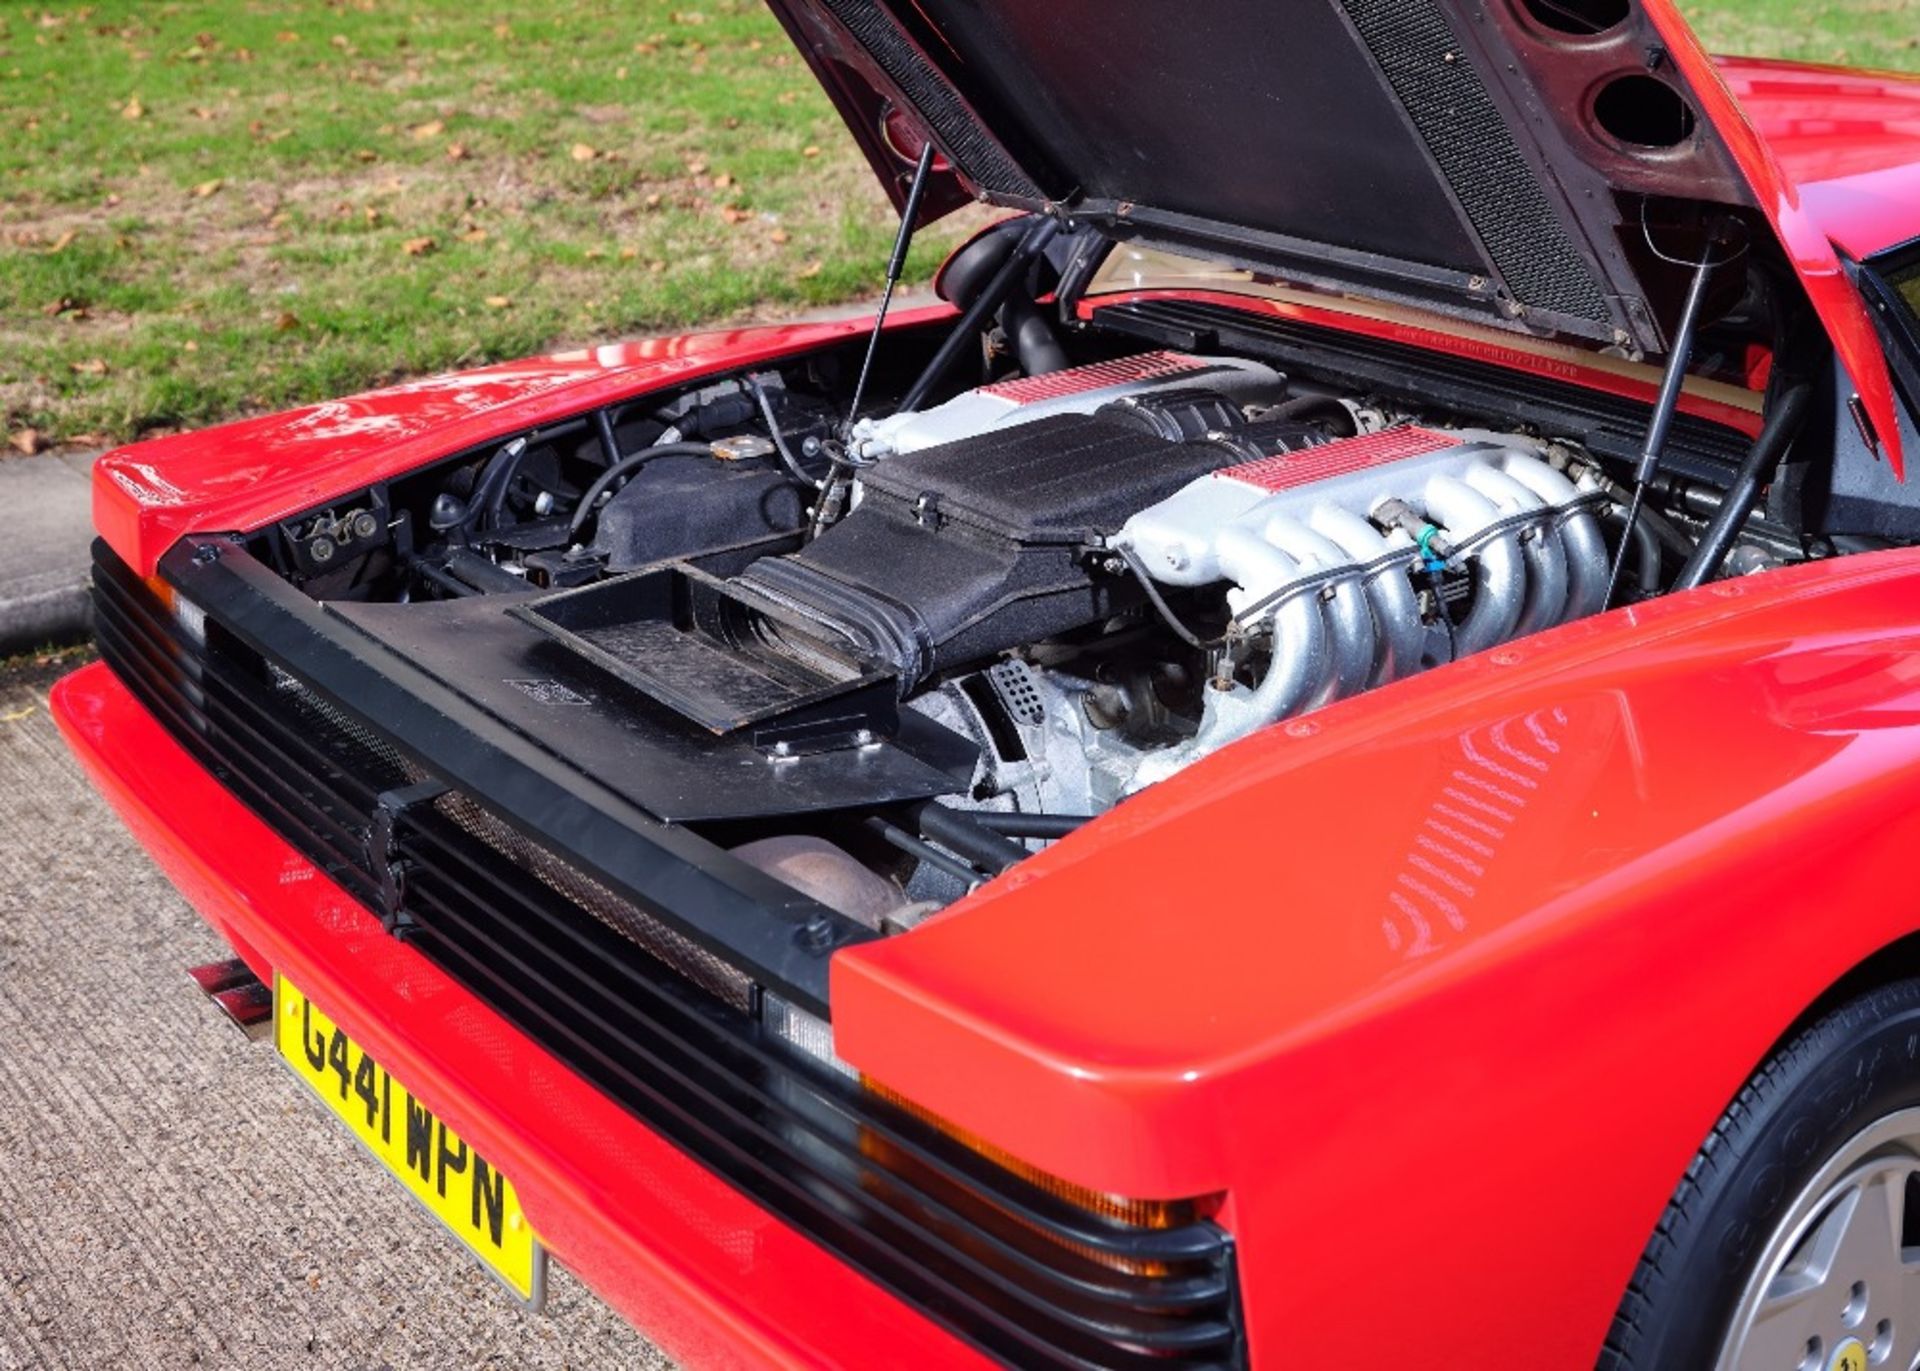 1989 FERRARI TESTAROSSA Registration Number: G441 WPN Chassis Number: ZFFAA17C000082817 Recorded - Image 10 of 59